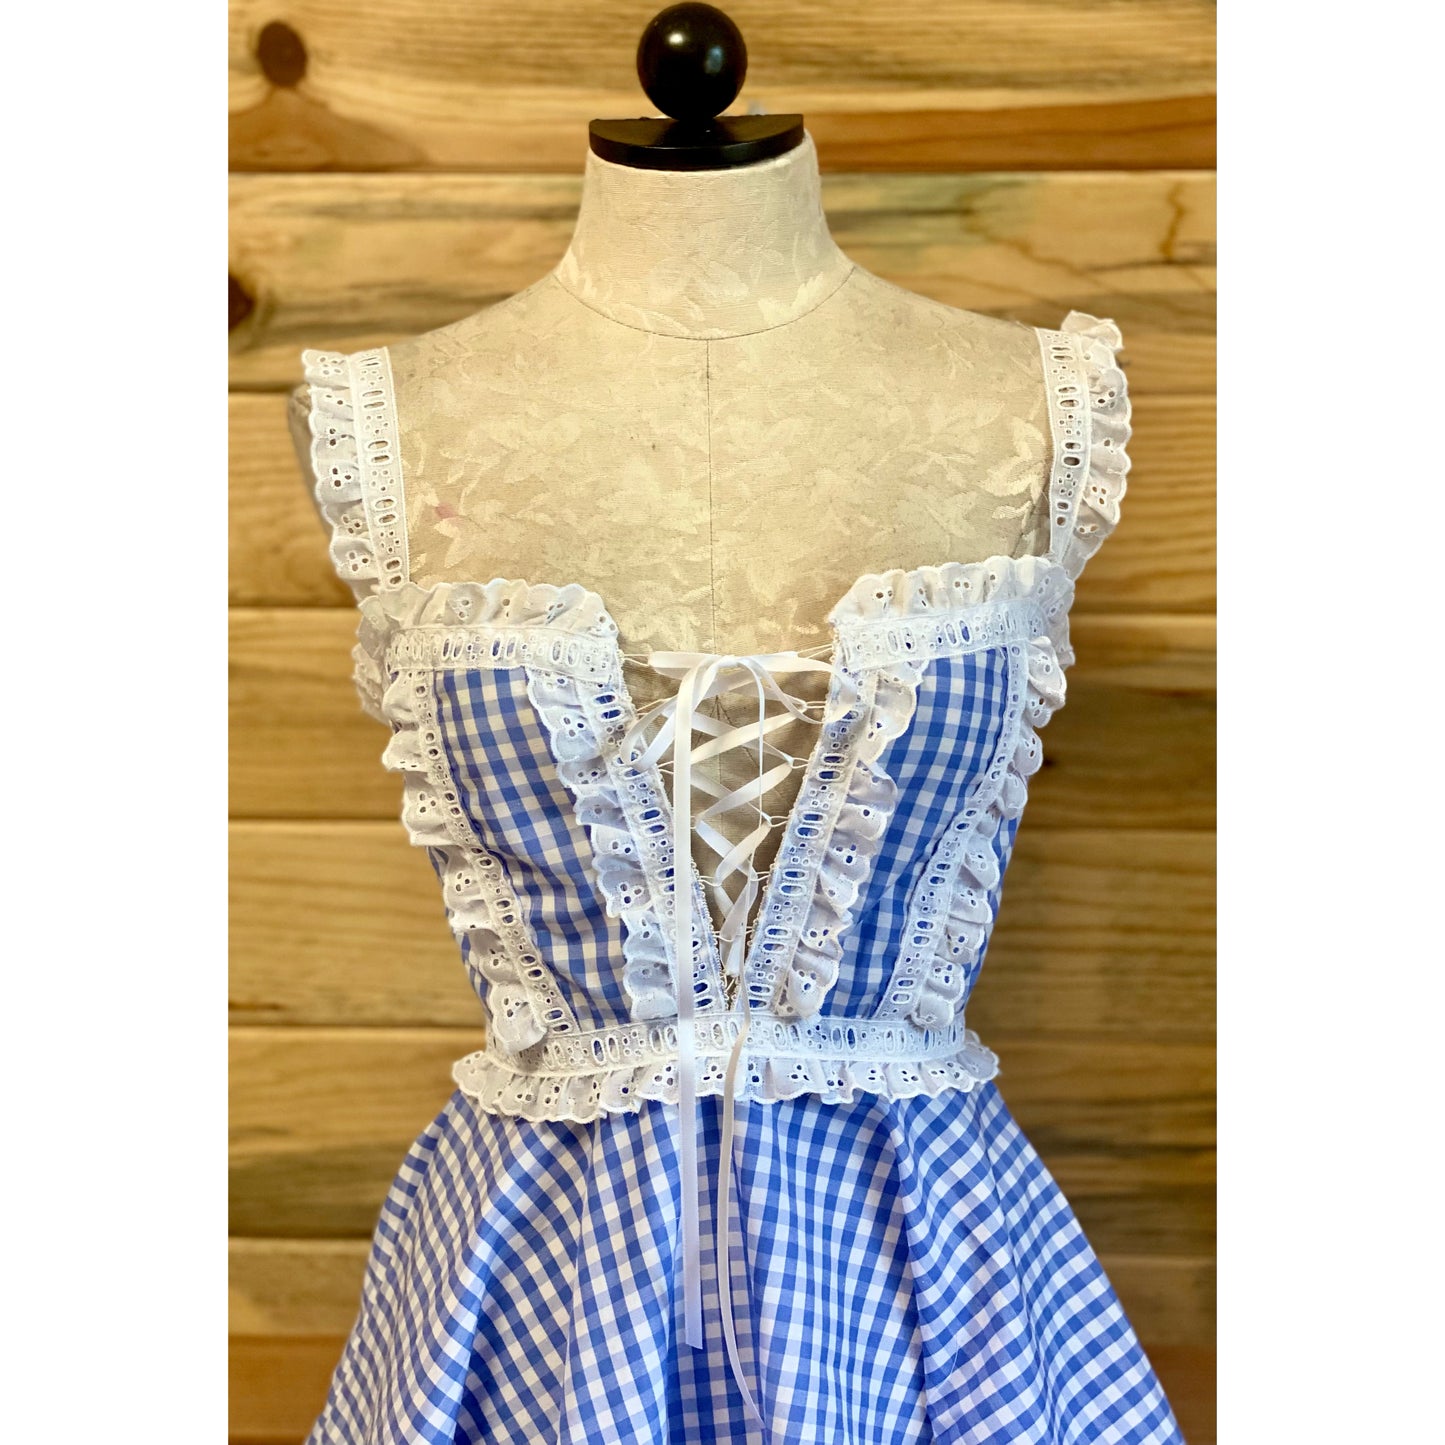 The Danni Dress in Blue Gingham